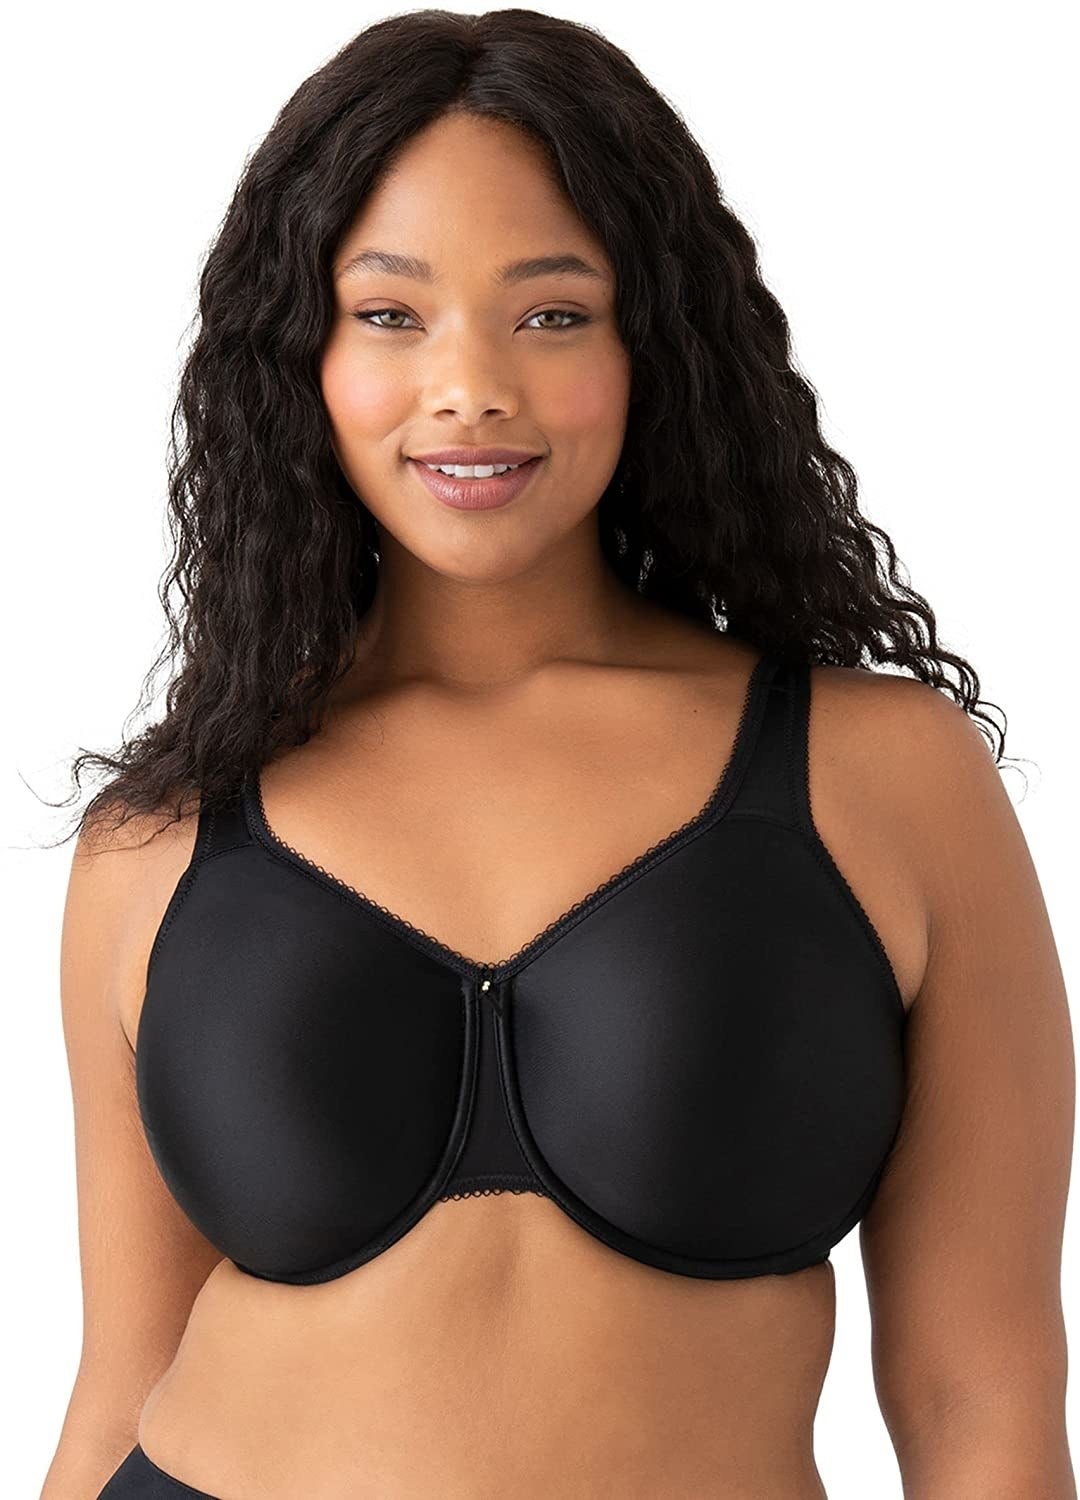 Wacoal - According to BuzzFeed our La Femme bra “lasts forever and